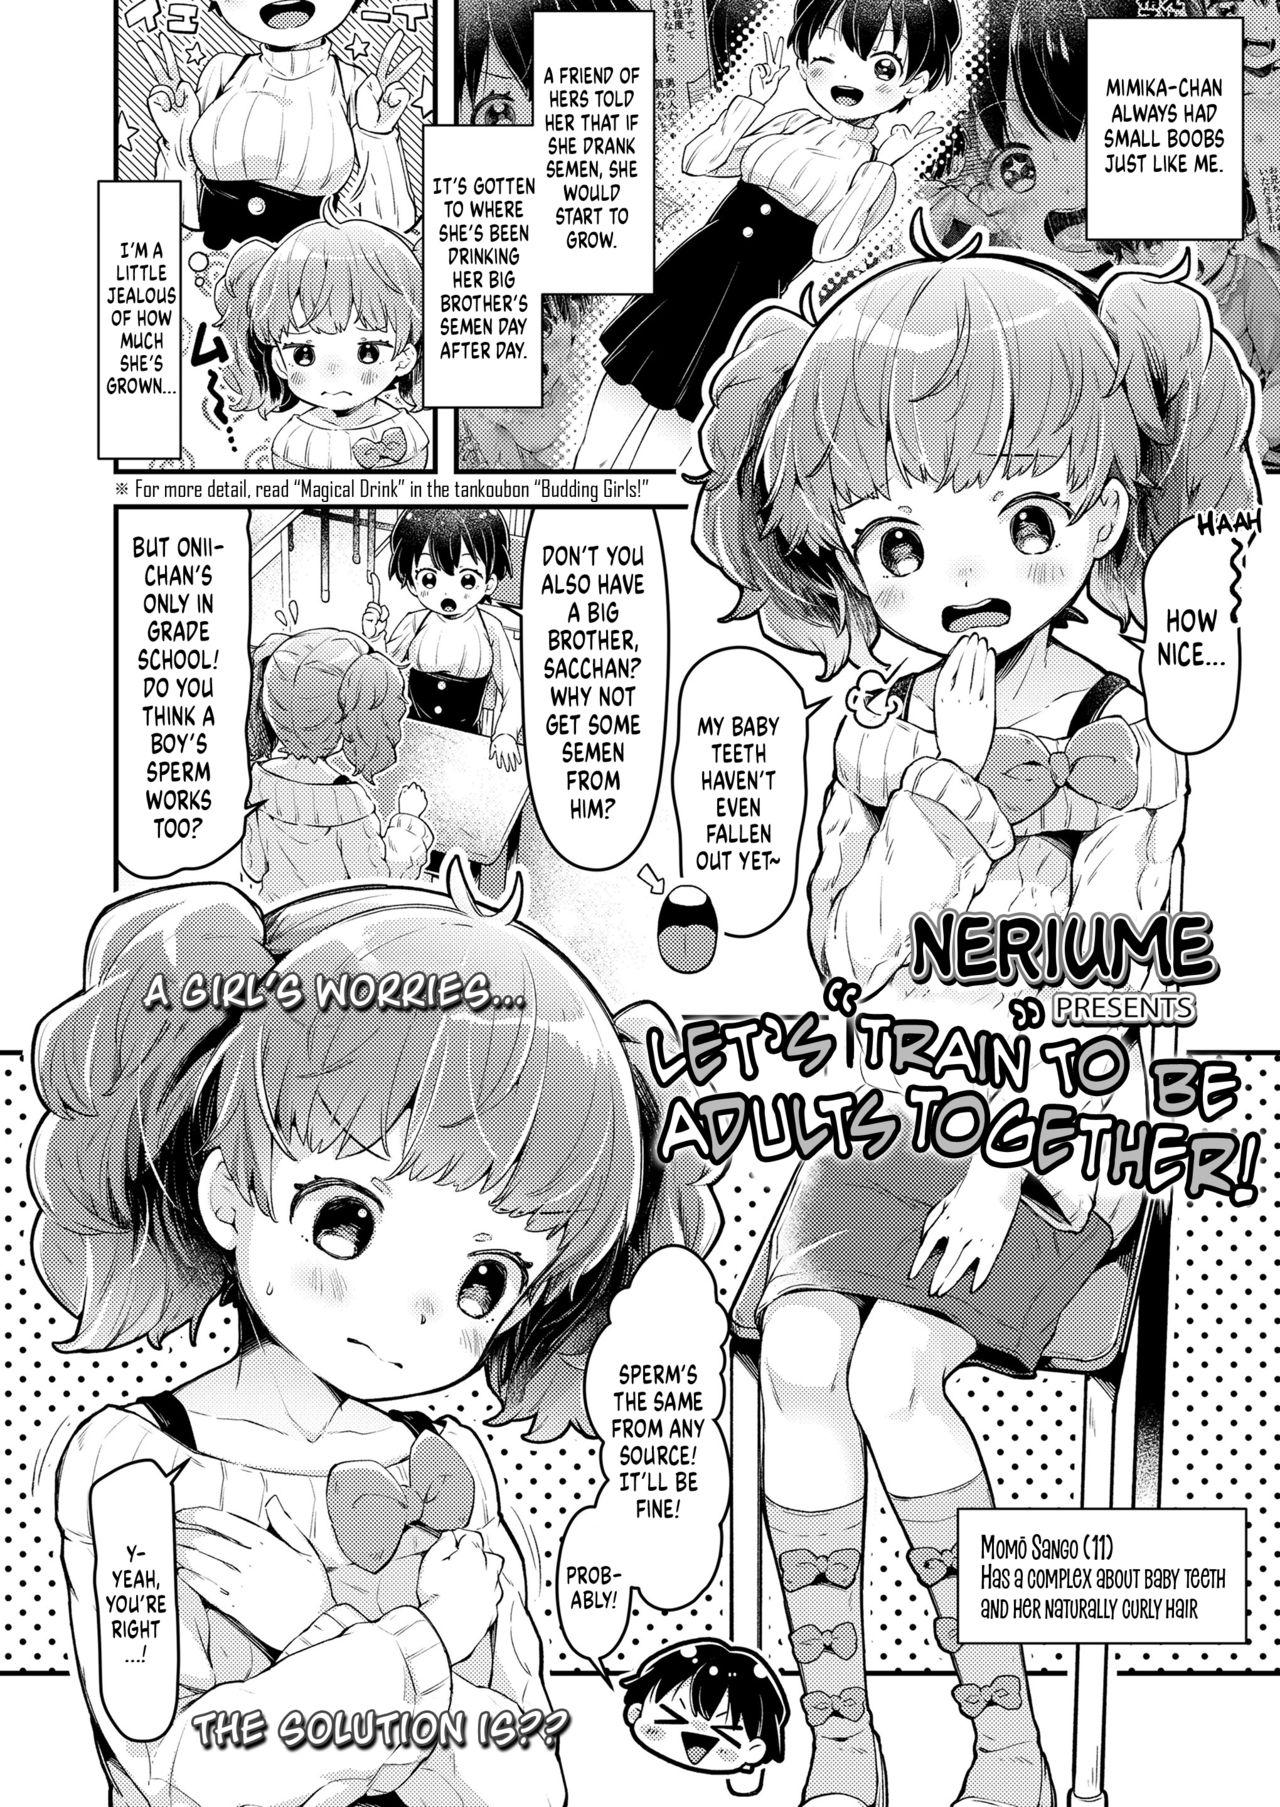 Step Fantasy Issho ni Otona Training! | Let's Train to be Adults Together! Gaycum - Page 2